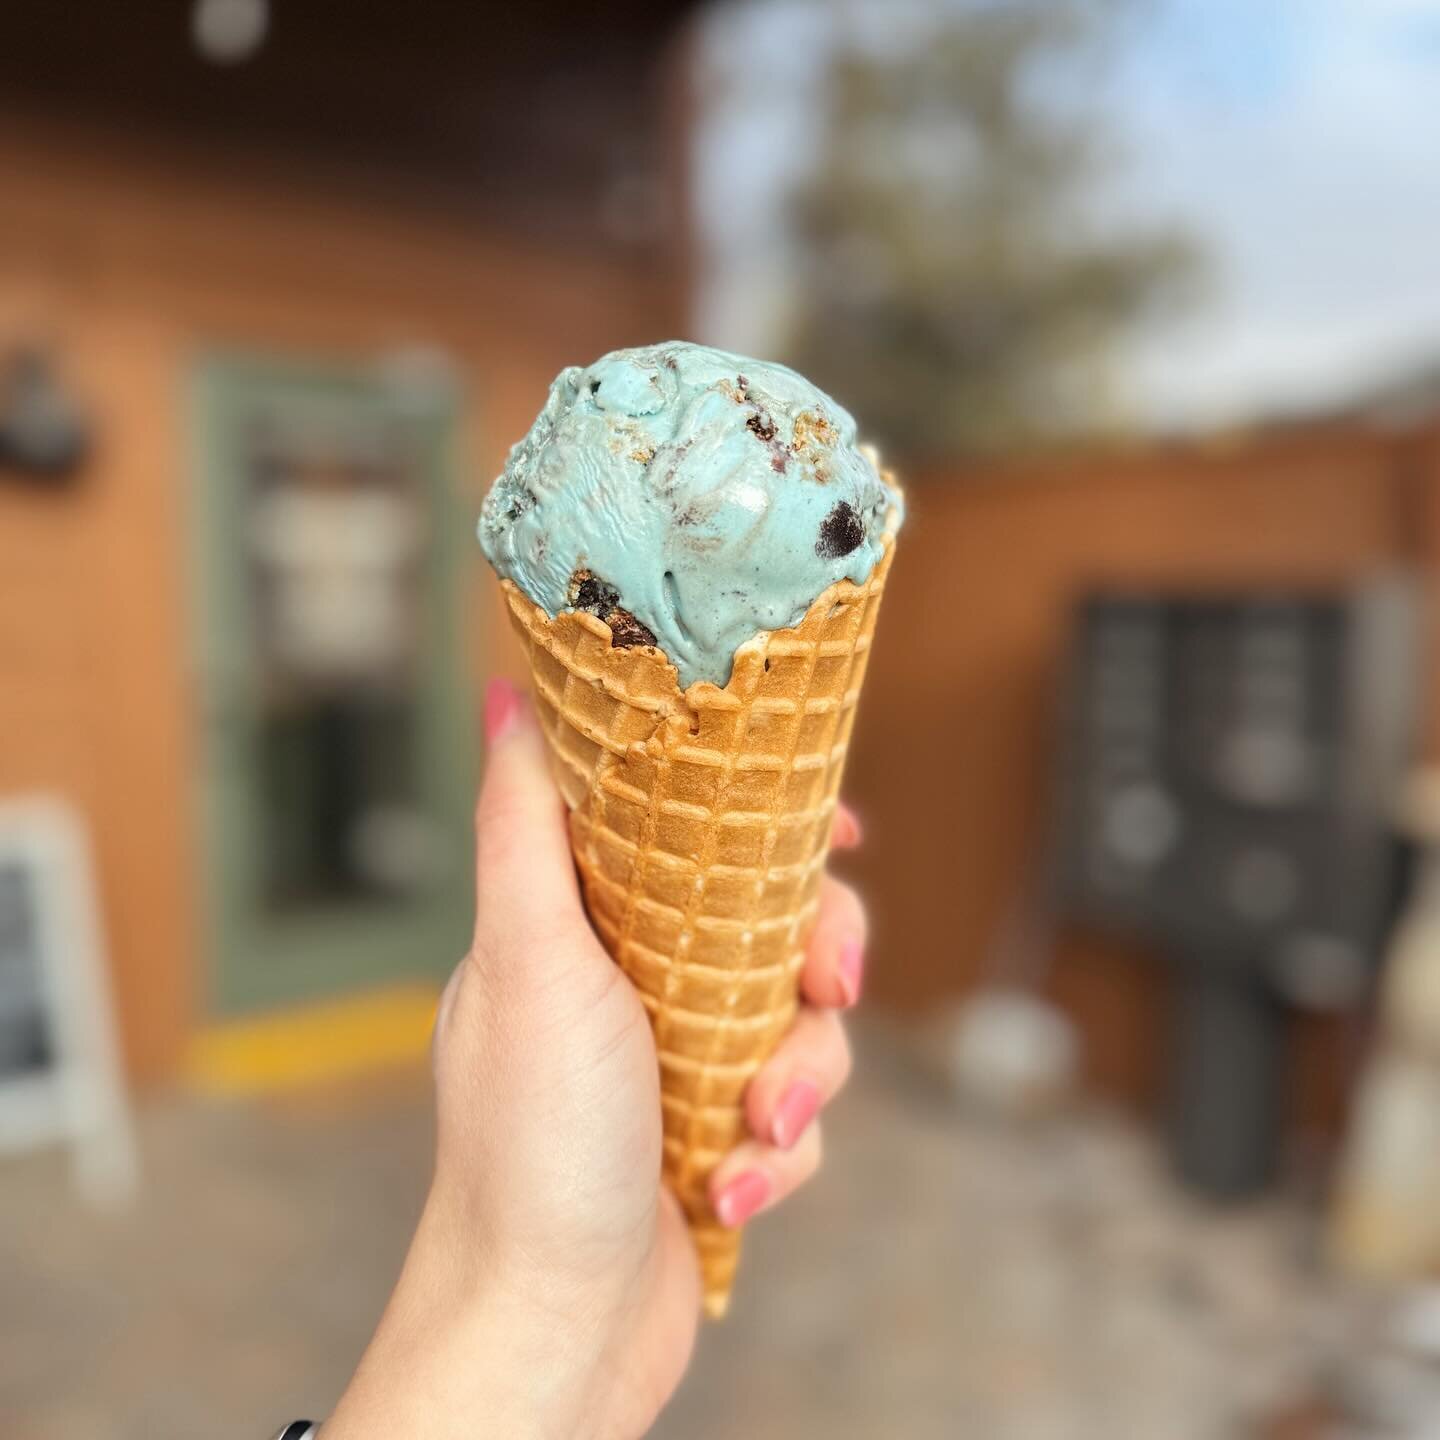 ✨ Cookie Monster ✨

A BLUE ice cream with a brown sugar + vanilla base
with homemade cookies and Oreos mixed in + finished with a fudge swirl. 😋 This is a seasonal flavor + it&rsquo;s GOOD!